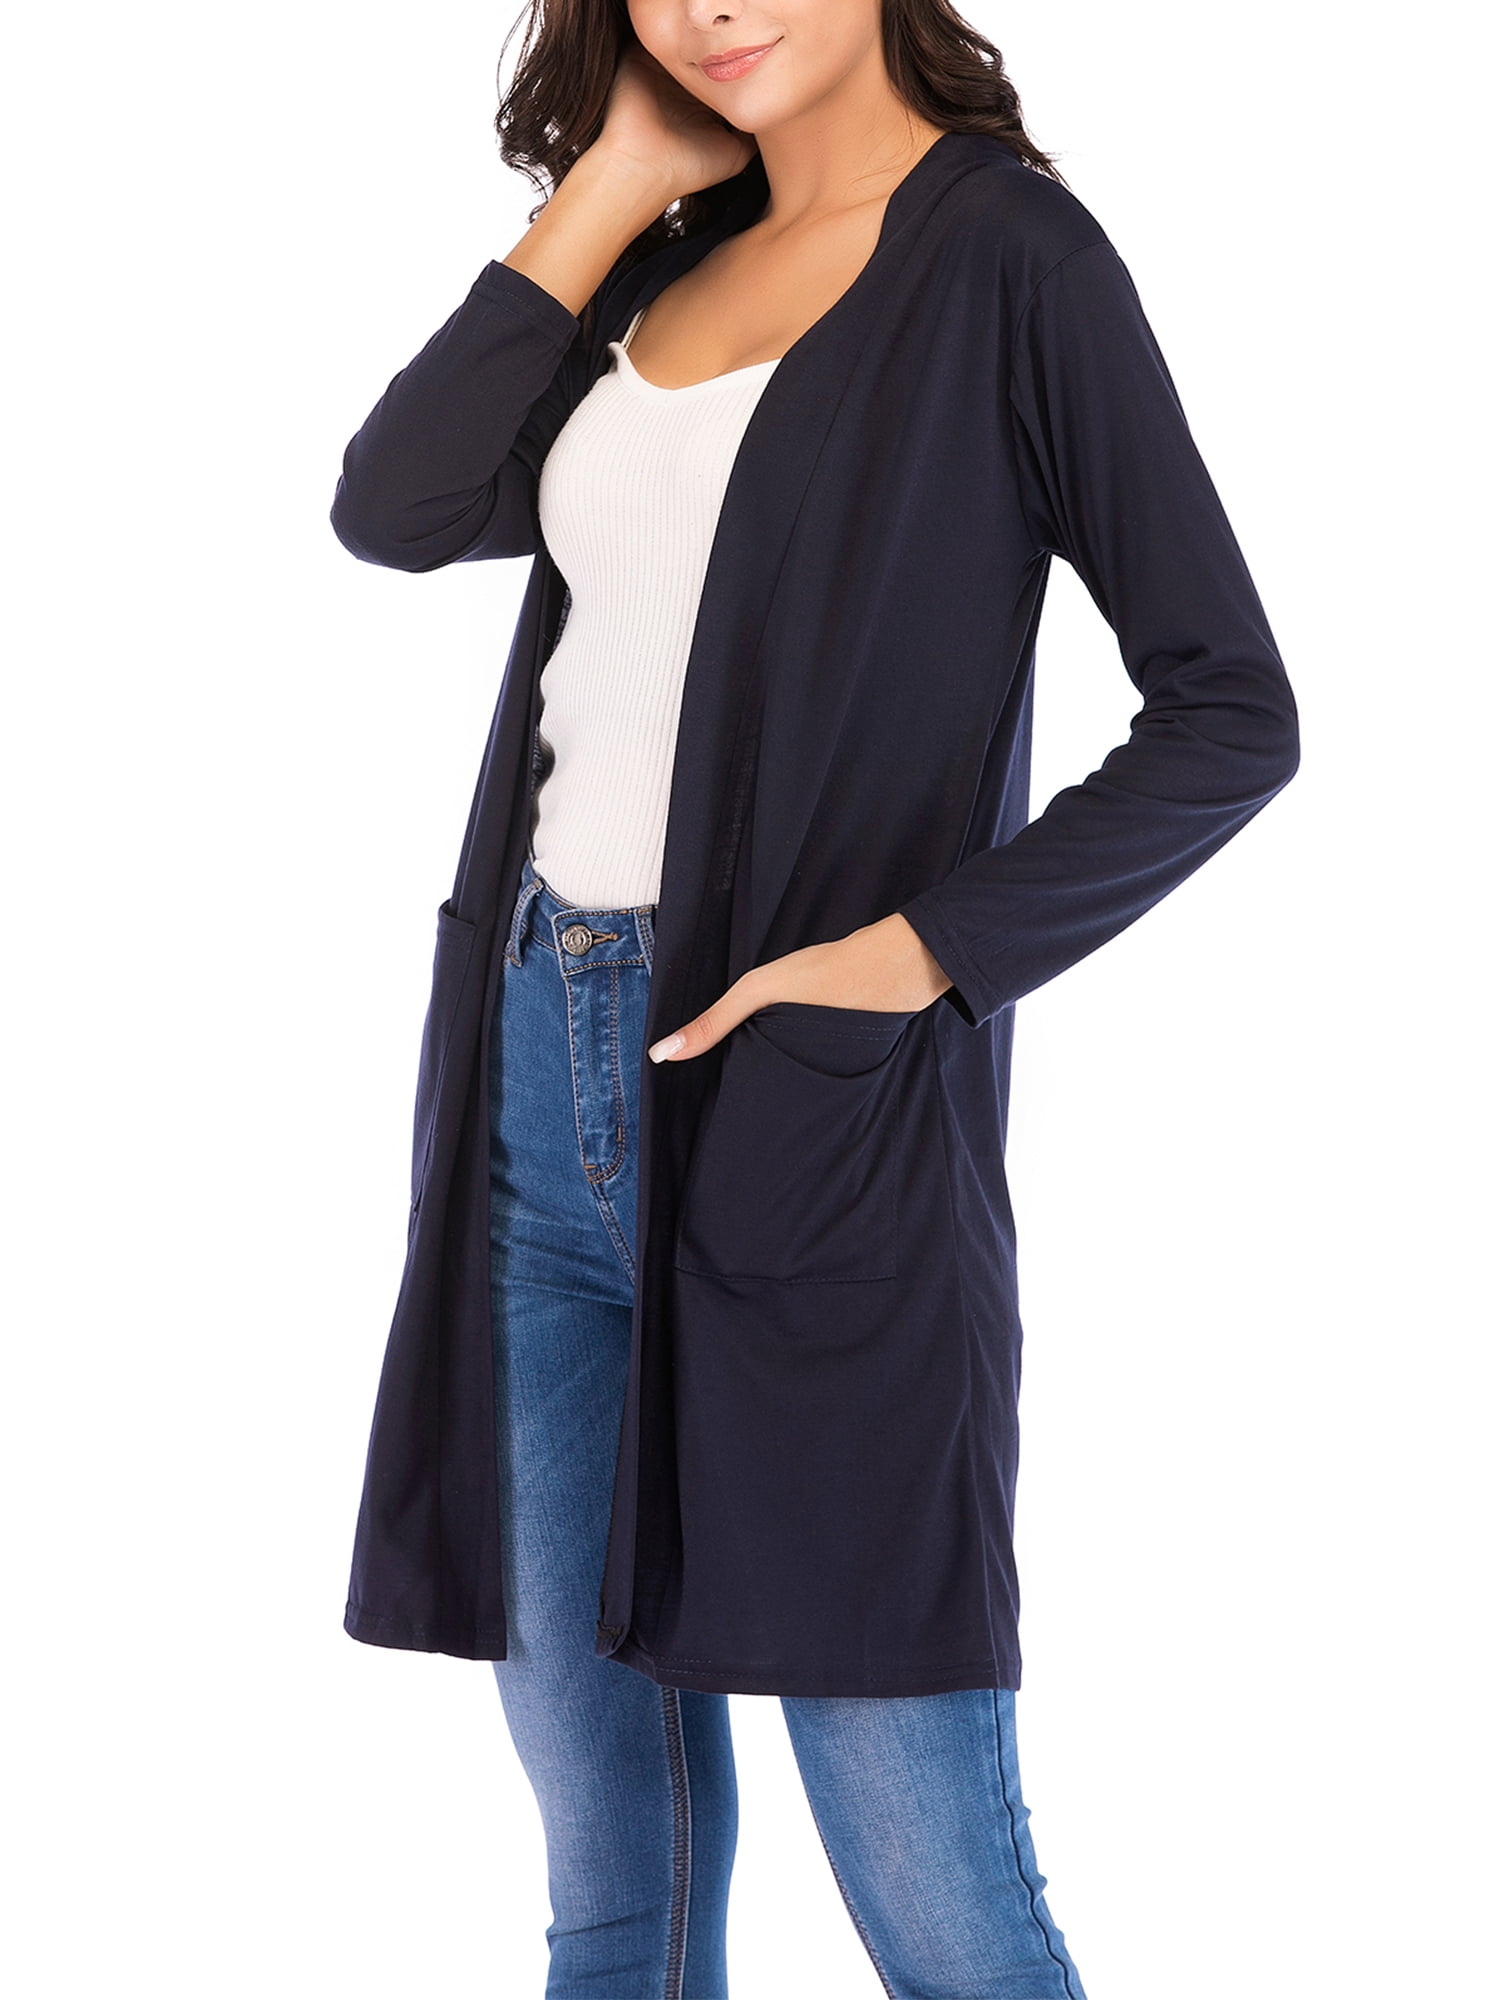 Women's Long Sleeve Open Front Cardigan Solid Lightweight Shirts Plus ...